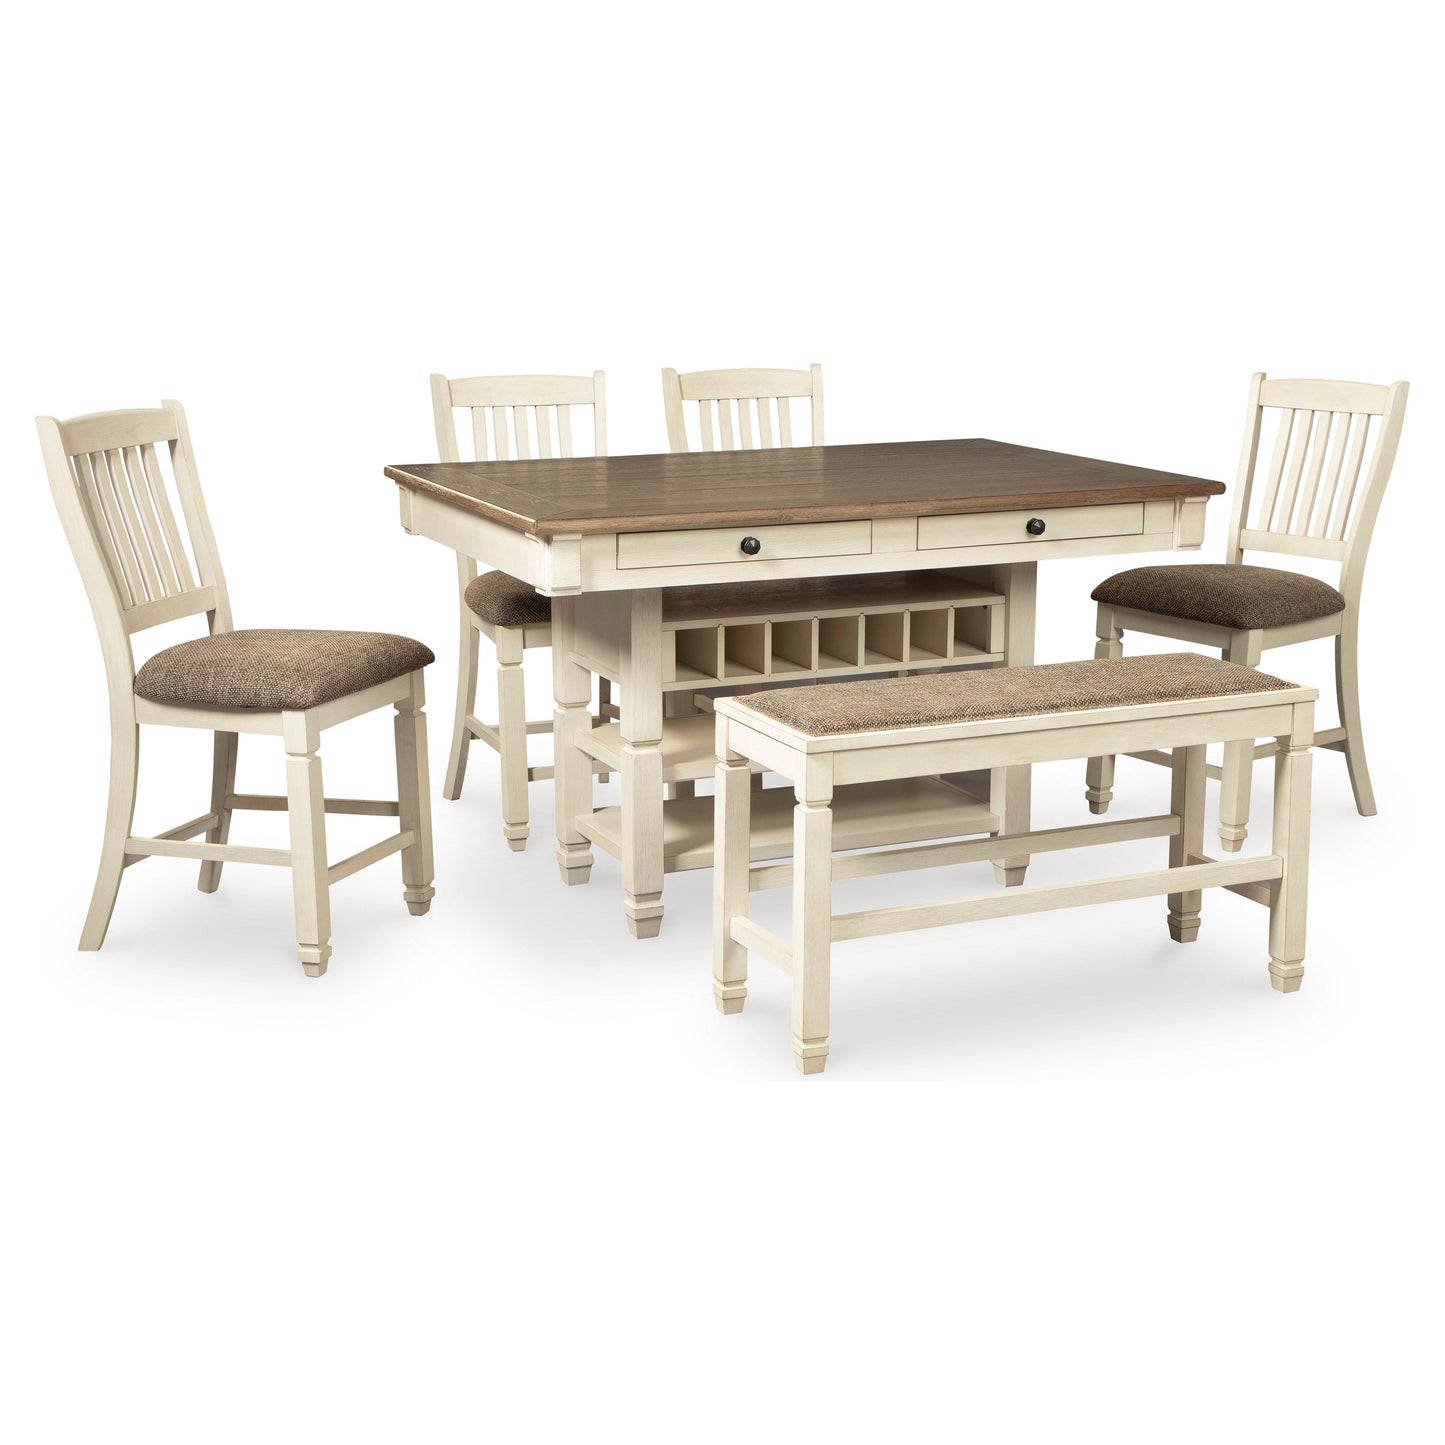 BOLANBURG COUNTER HEIGHT DINING TABLE - TABLE, 4 CHAIRS AND BENCH